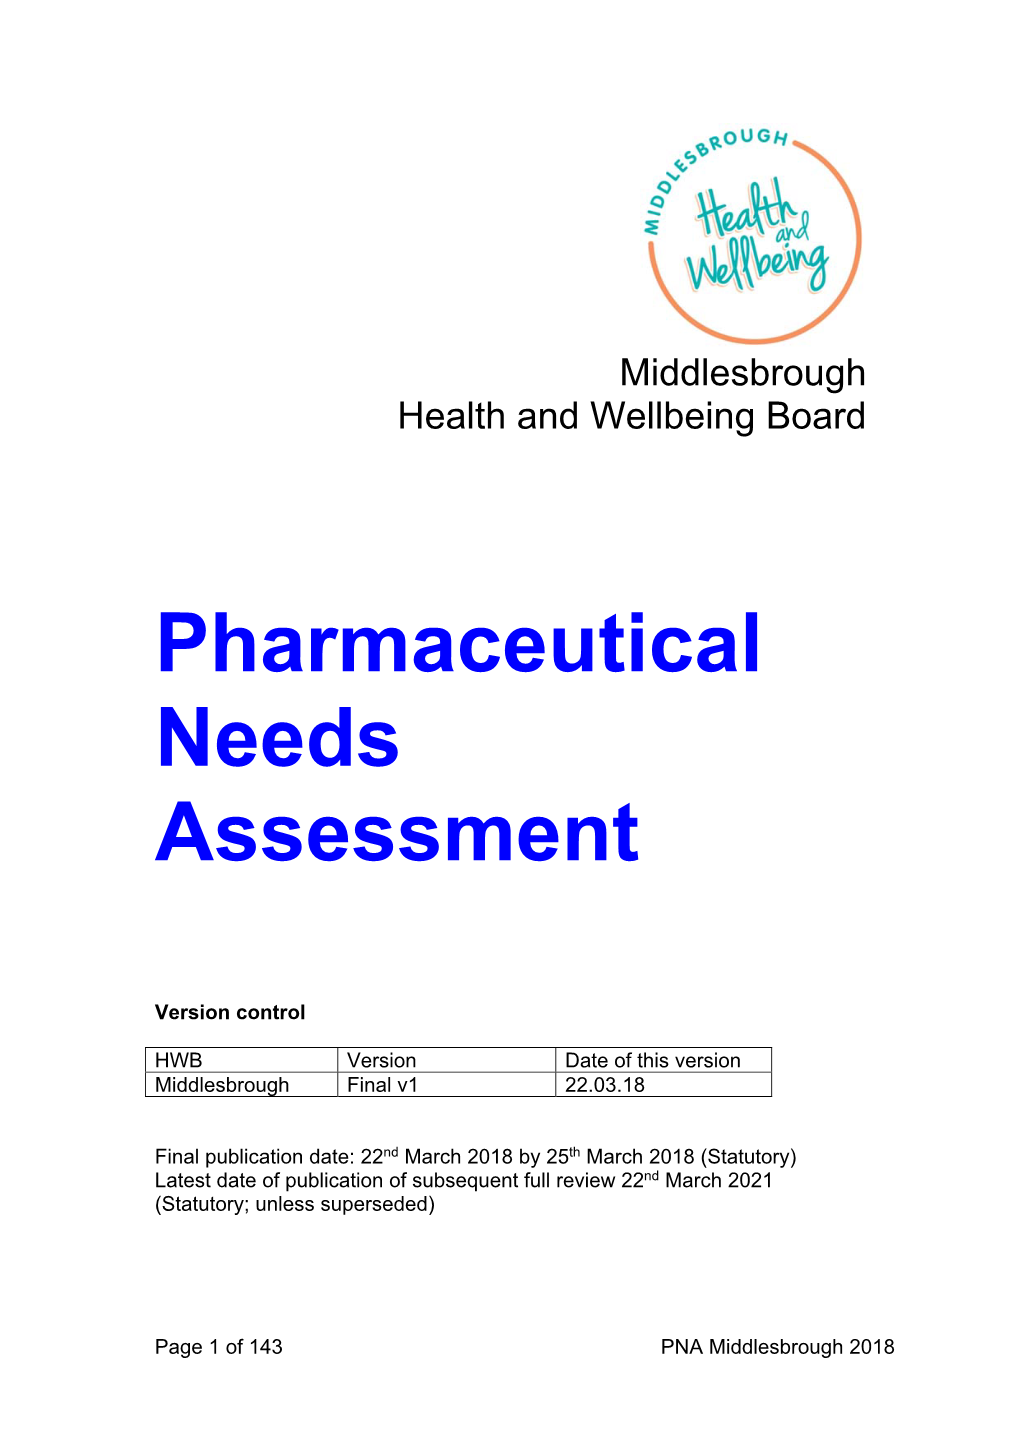 View the Pharmaceutical Needs Assessment 2018